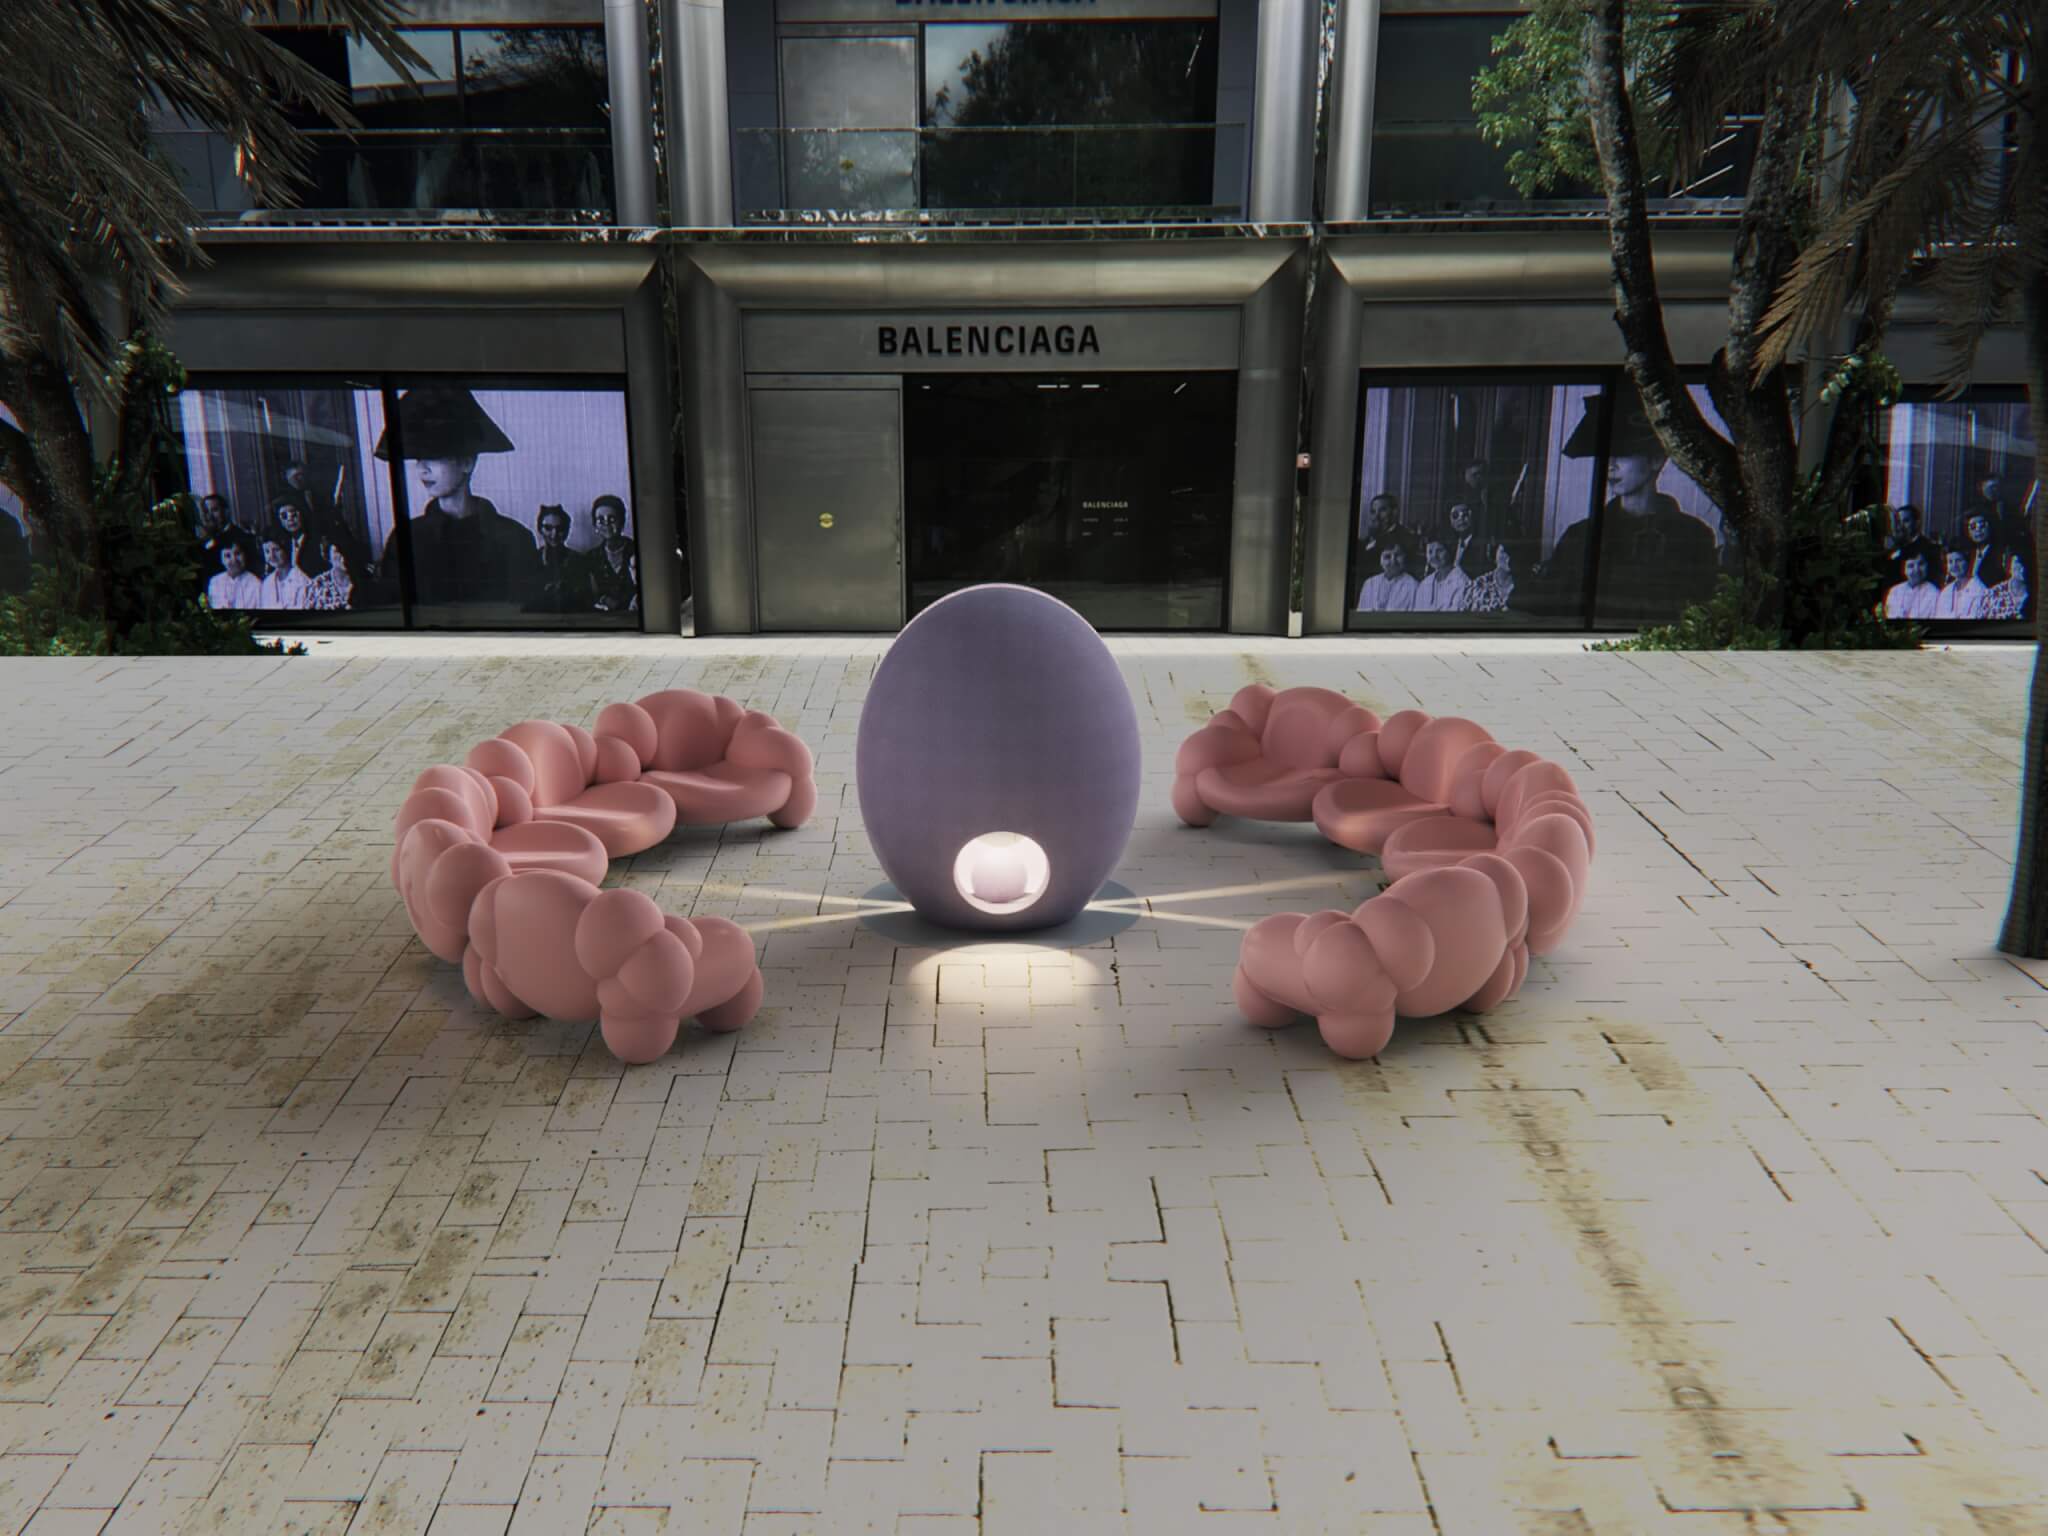 An eg sculpture with a light inside is surrounded by two long circular sofas.